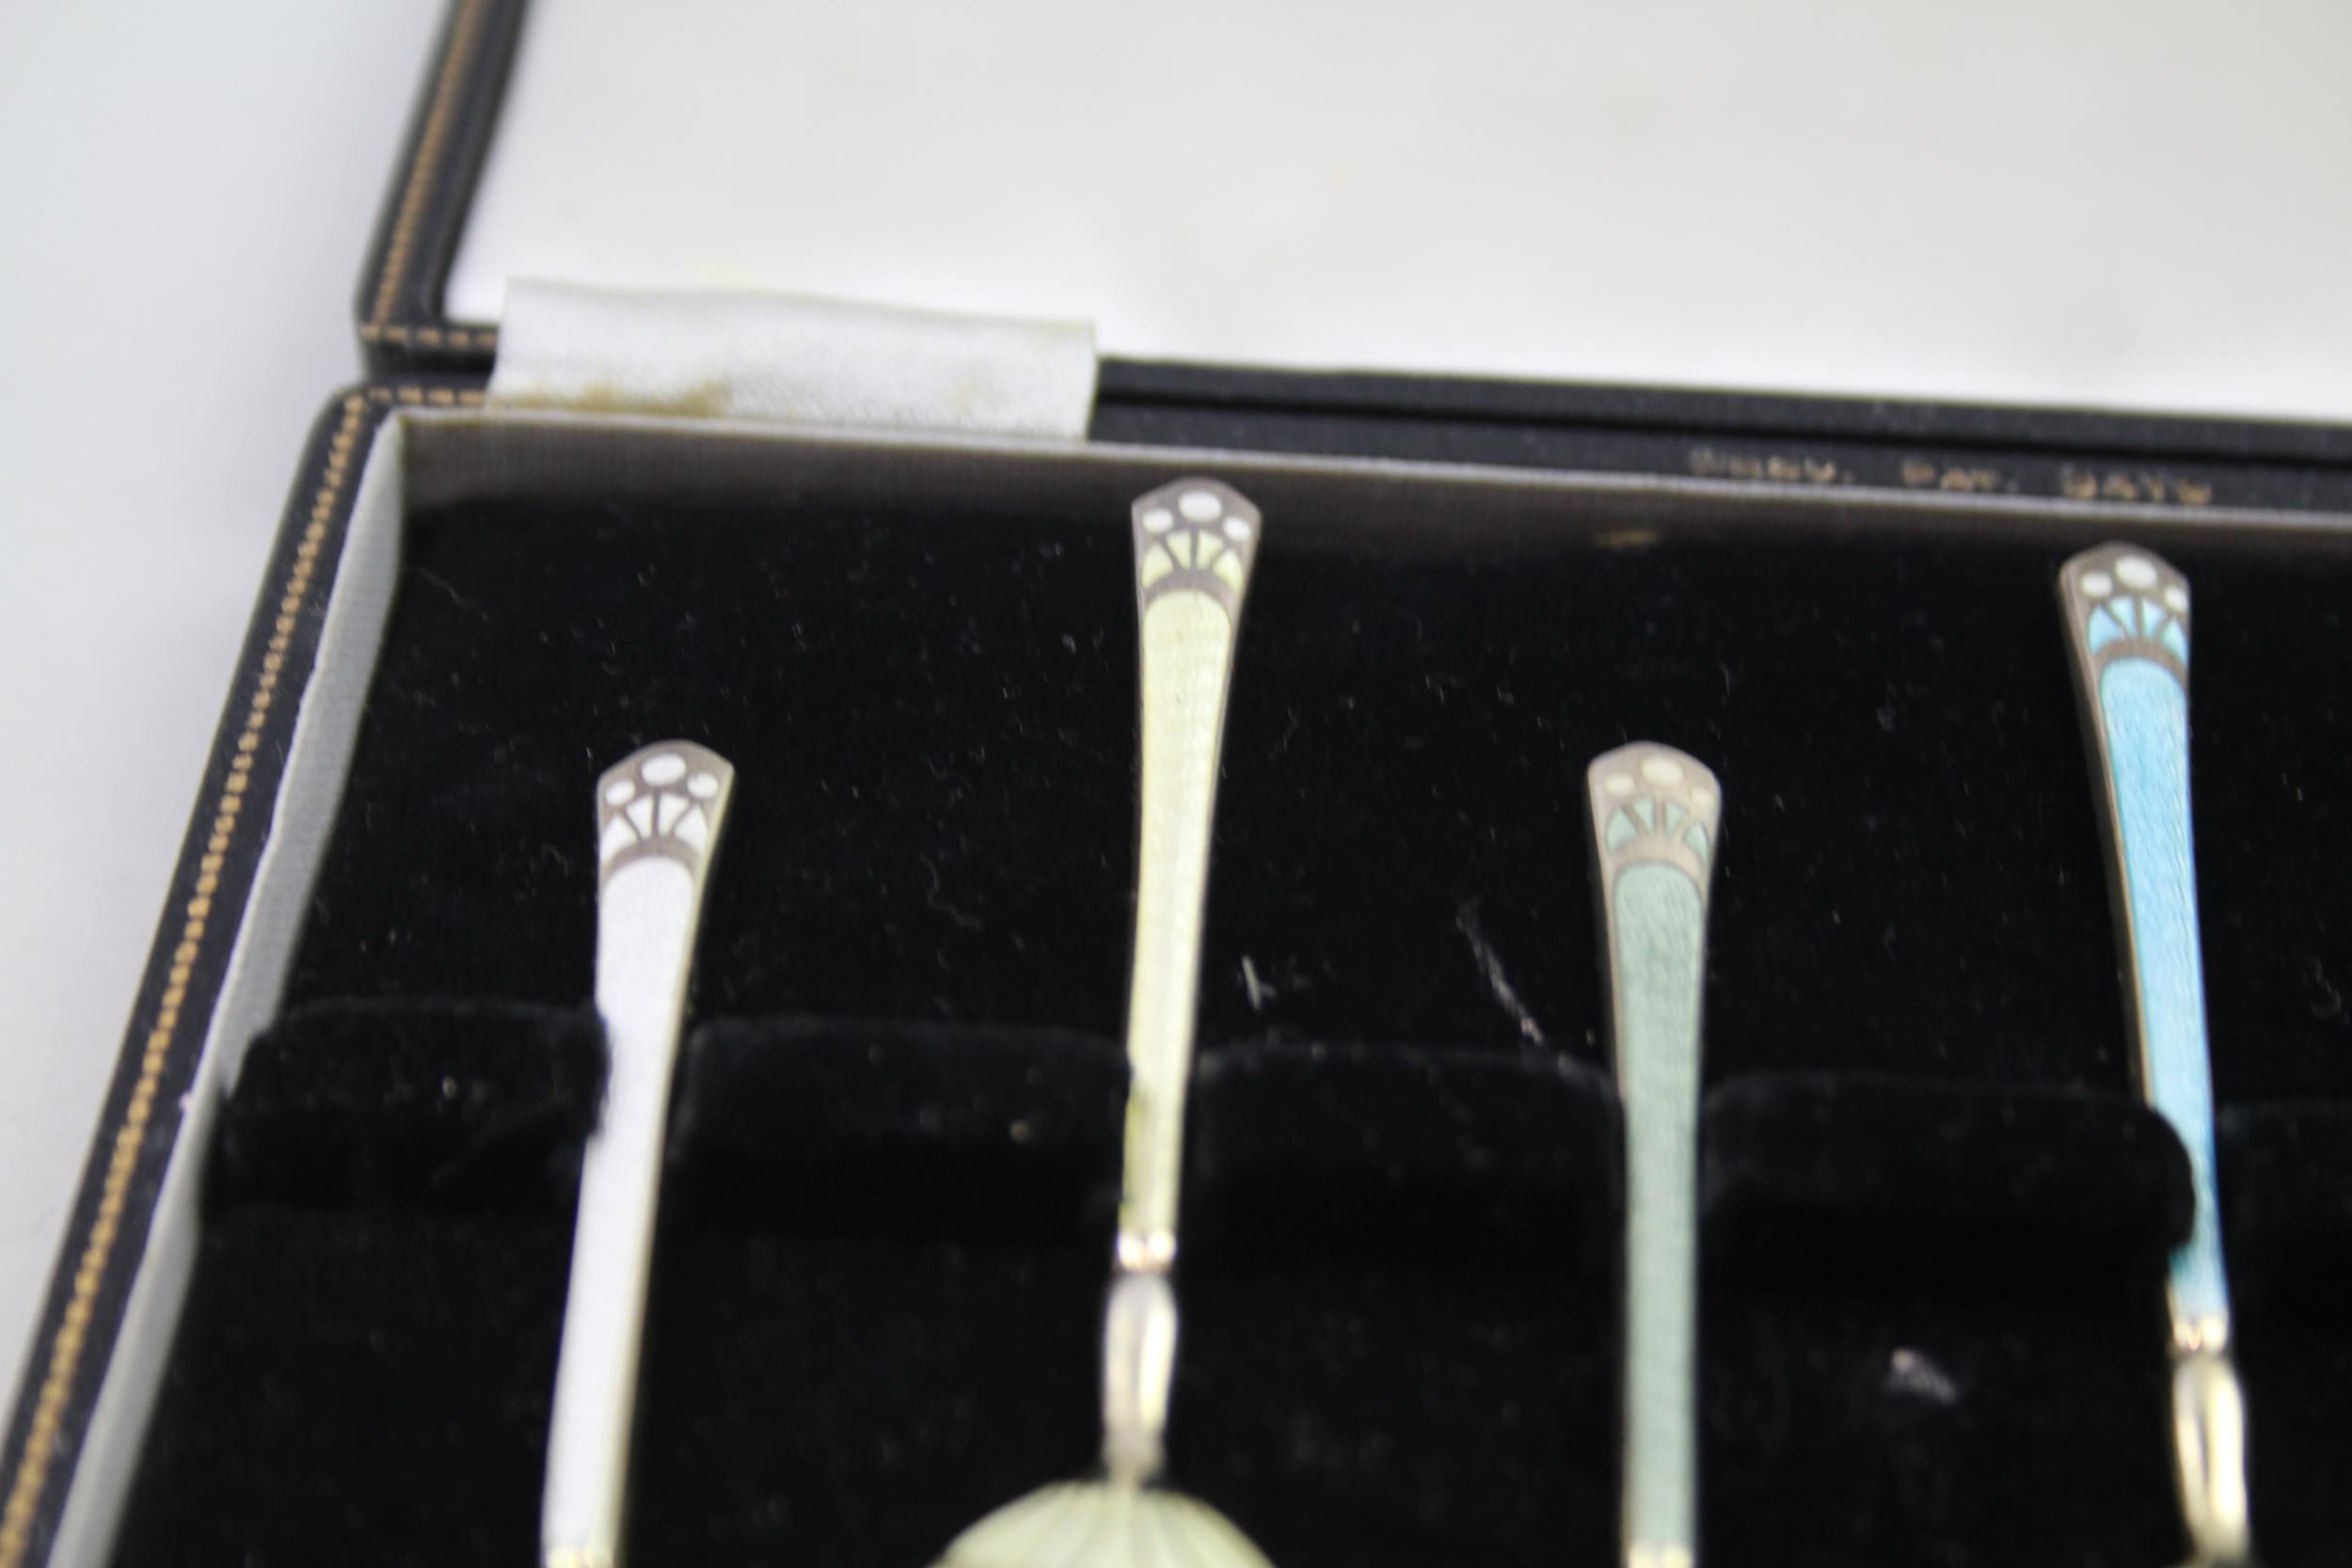 6 x Vintage 1956 Birmingham Sterling Silver Guilloche Enamel Spoons (69g) // w/ Fitted Case - Image 2 of 5